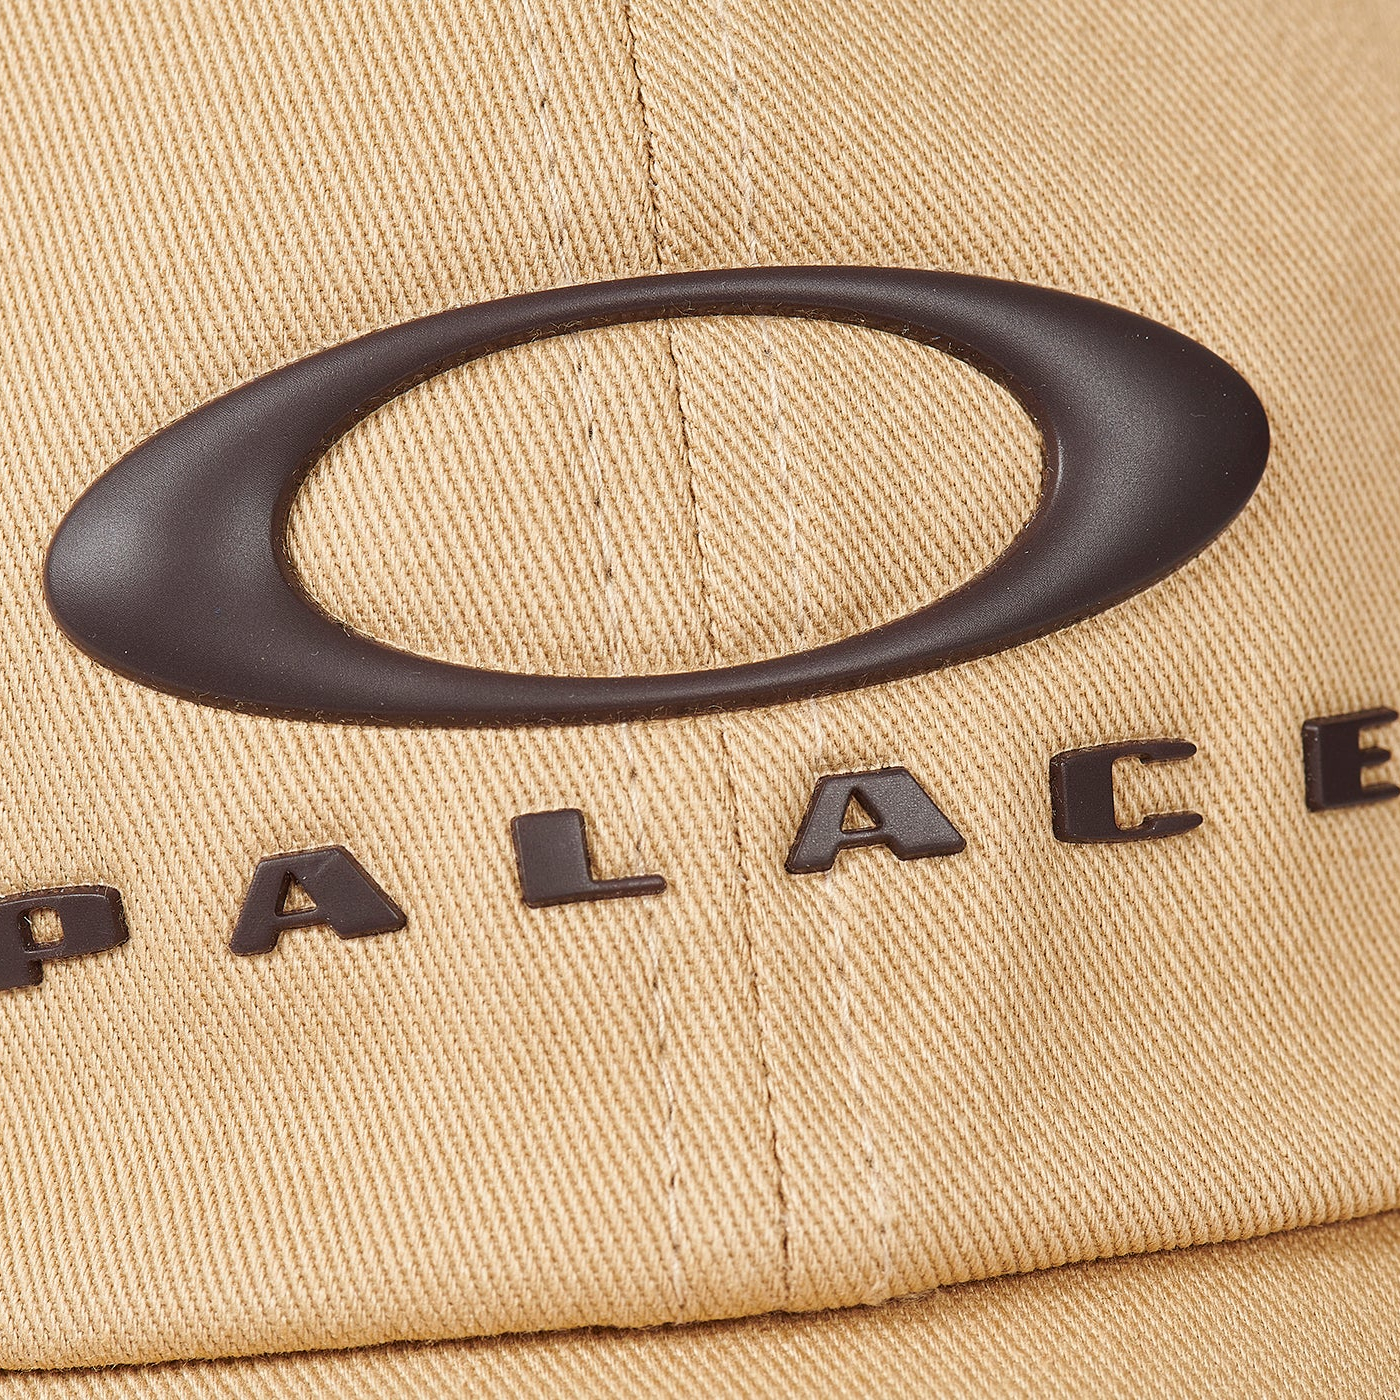 Thumbnail PALACE OAKLEY 6-PANEL SAND / BROWN one color